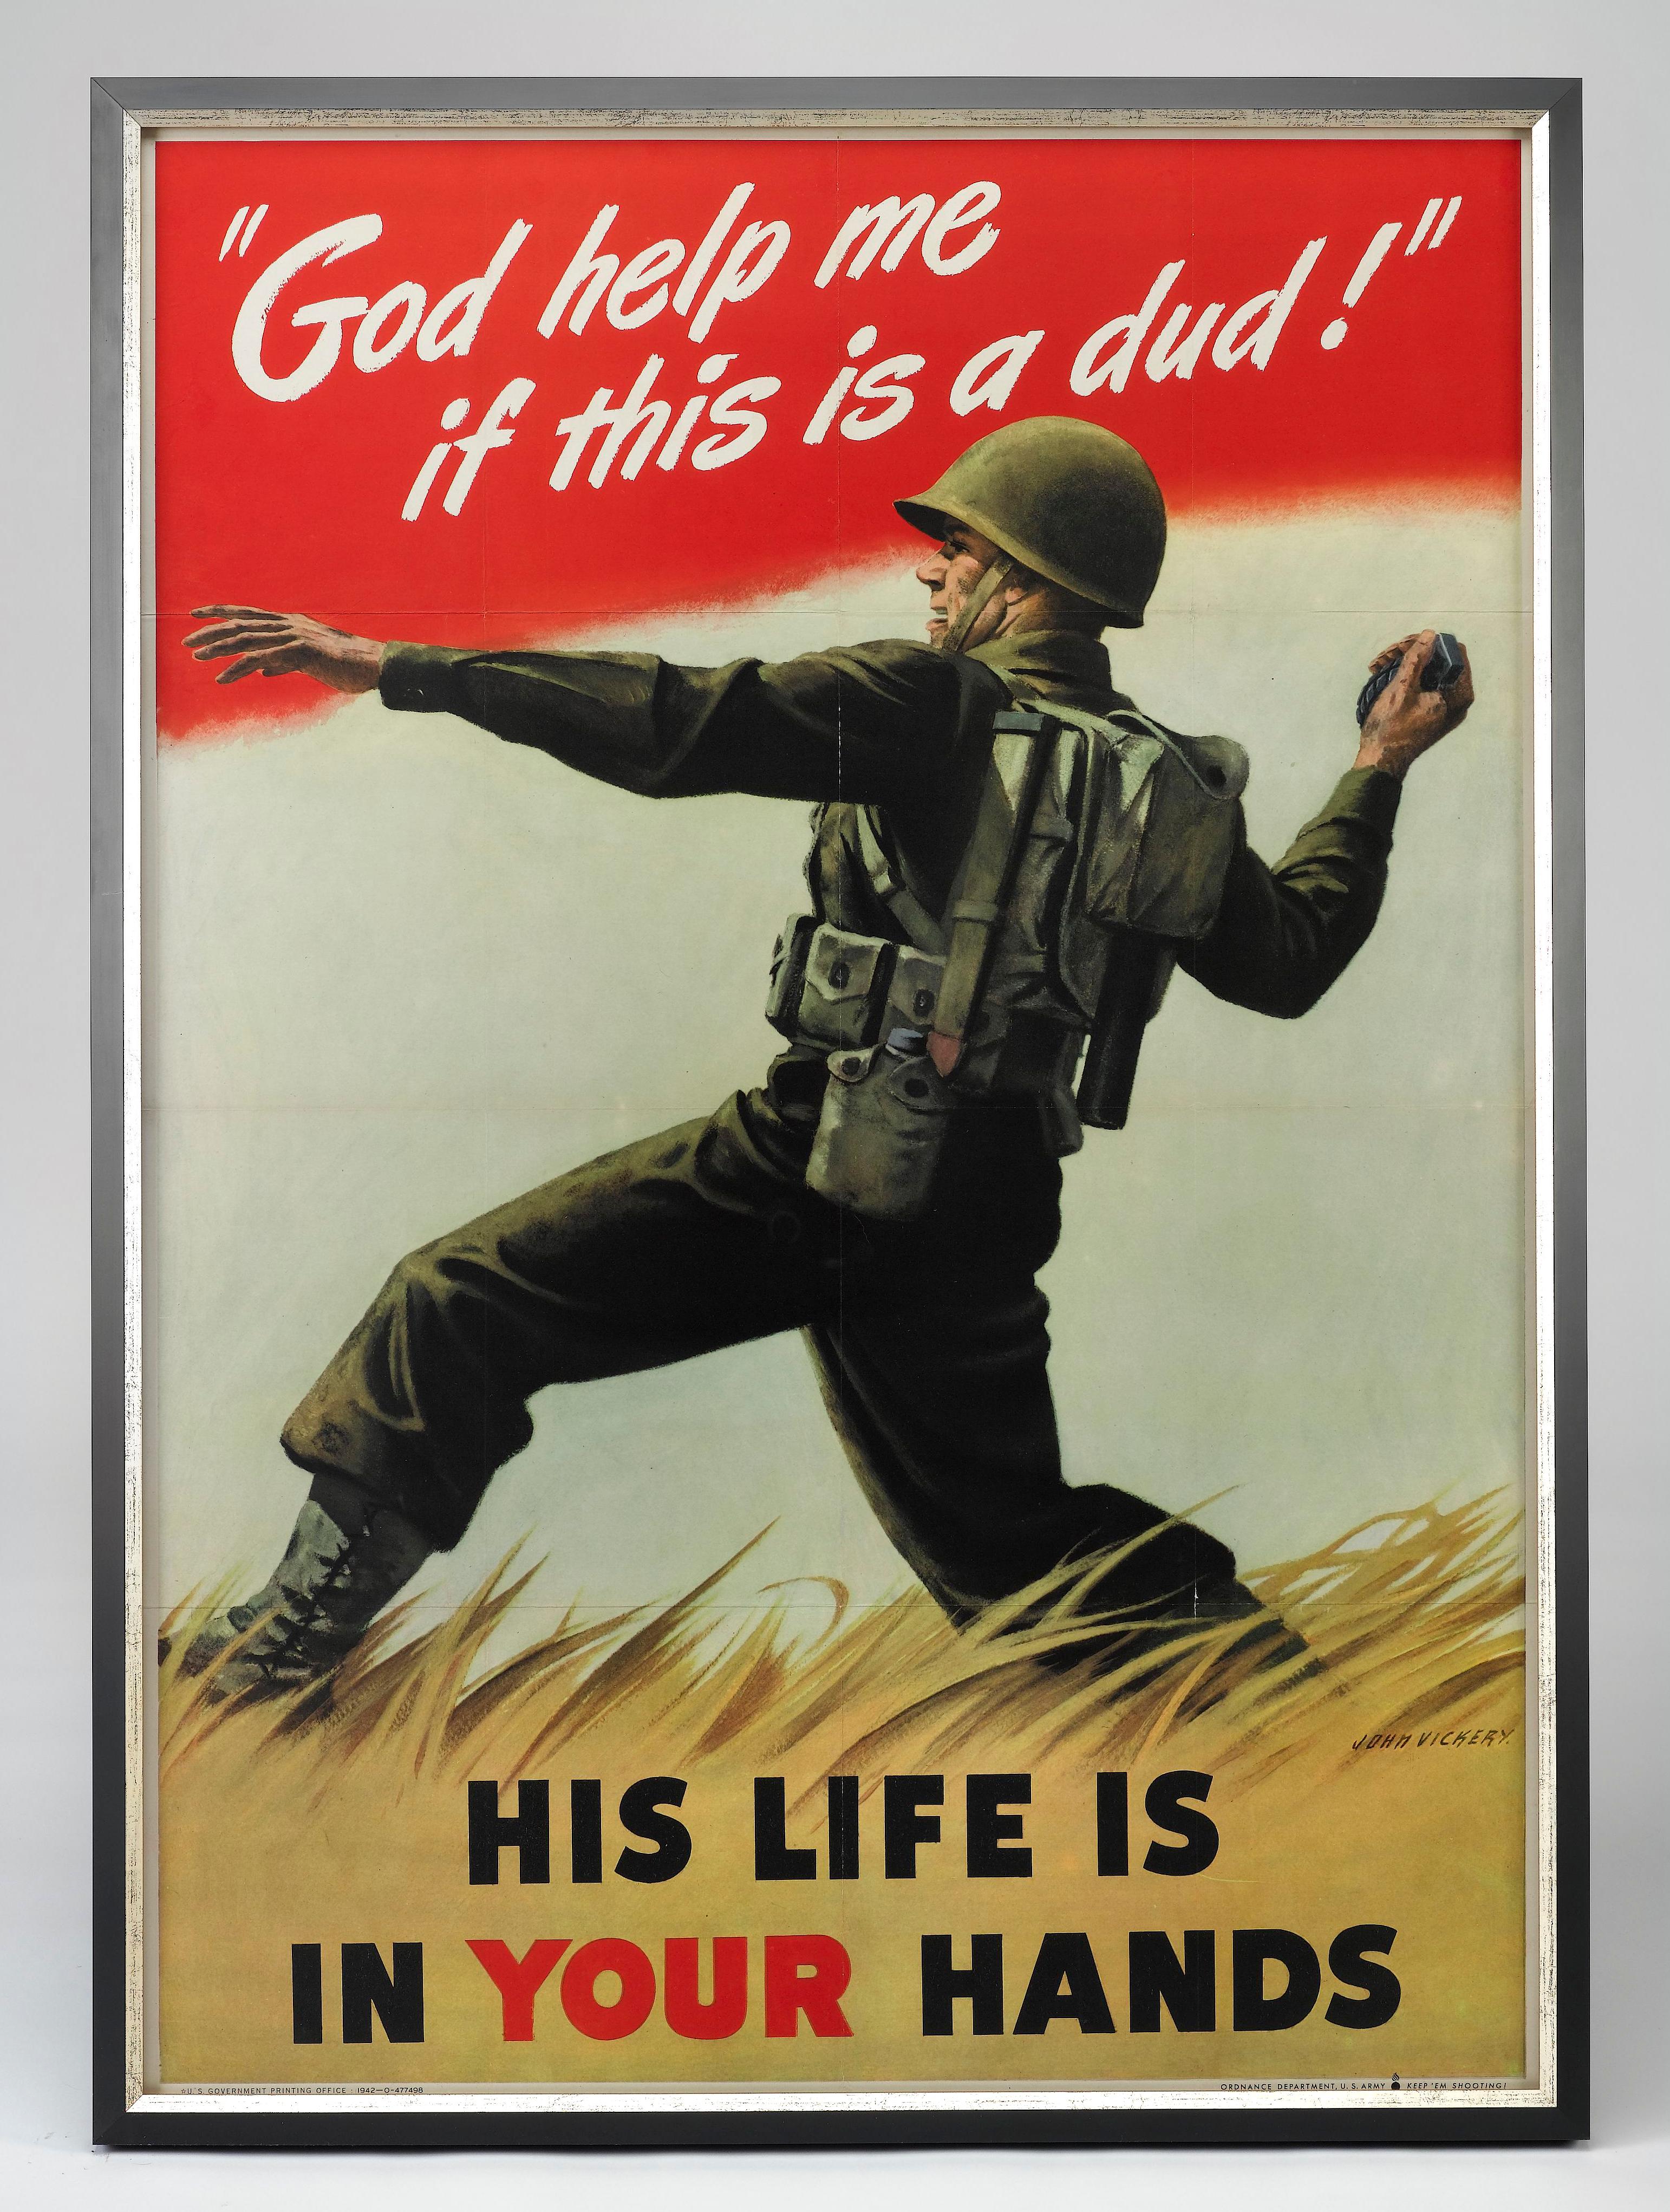 Presented is an original WWII poster by artist John Vickery. The poster depicts an American soldier as he prepares to hurl a grenade. The script “God help me if this is a dud!” is printed at the top of the composition, emphasized by a dark red